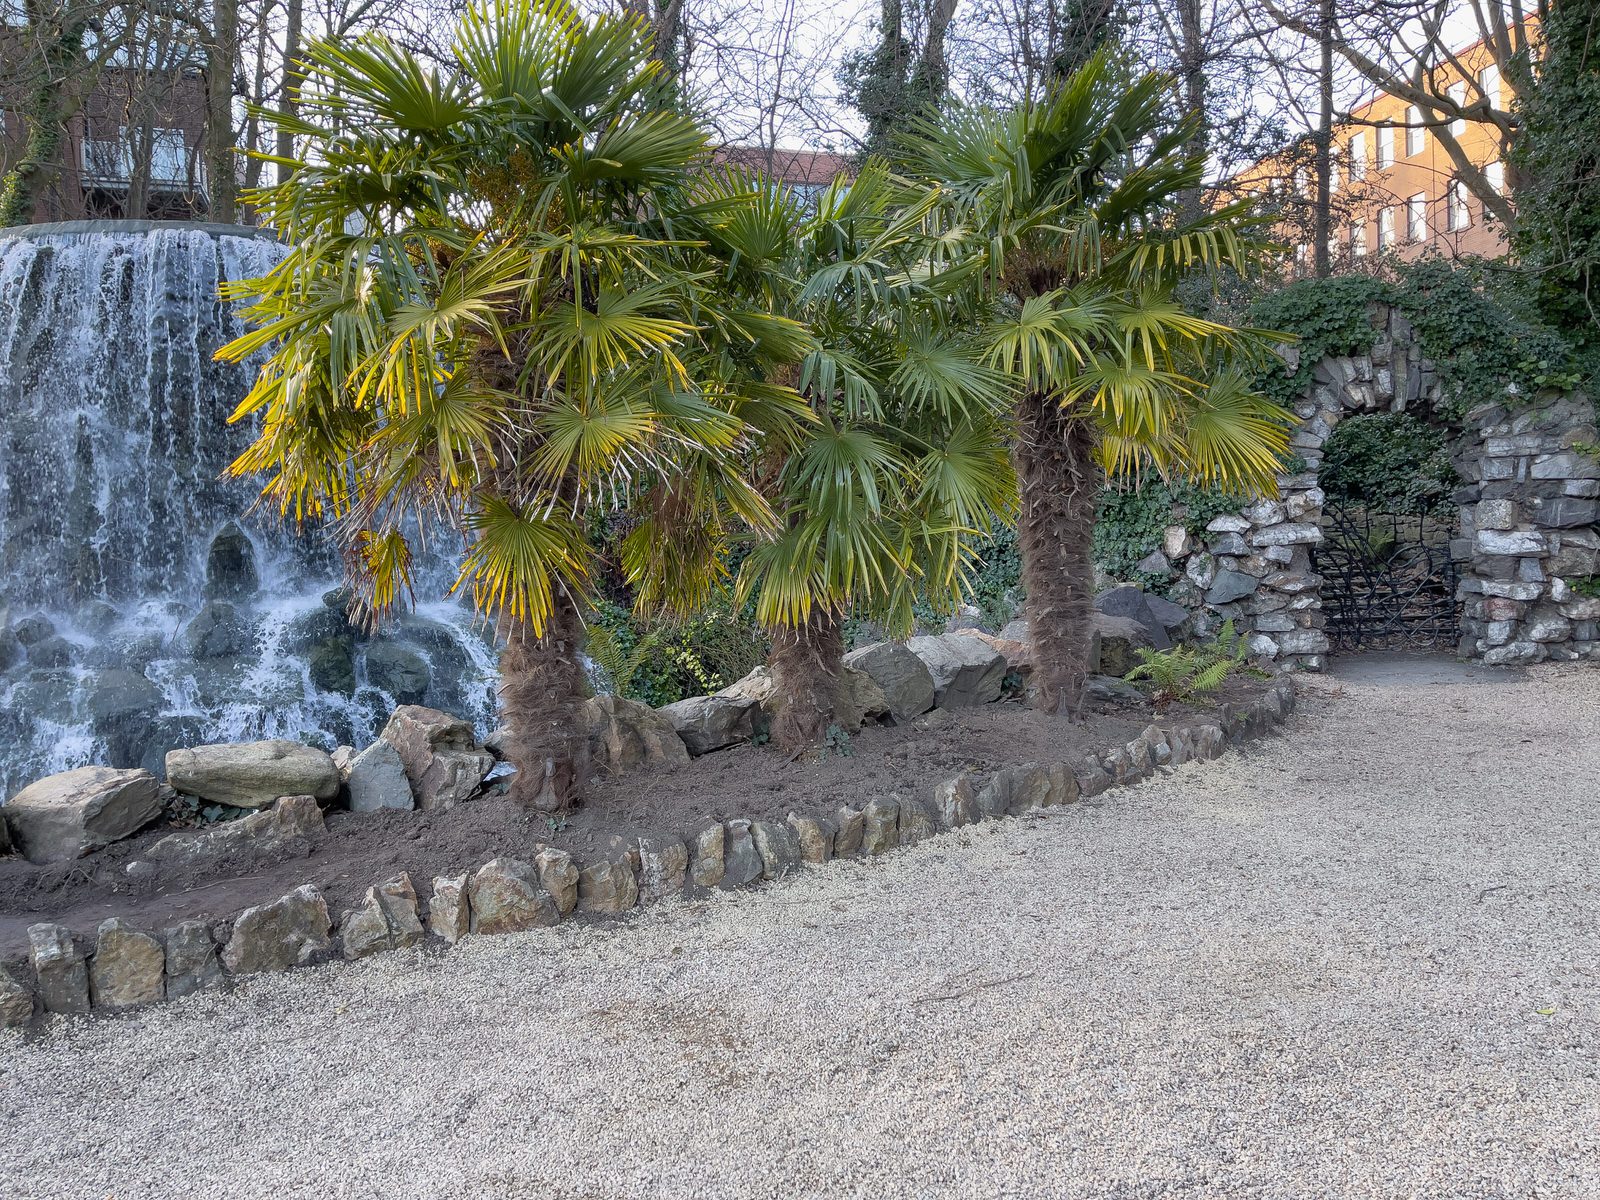 WATER FEATURES AT IVEAGH GARDENS 005